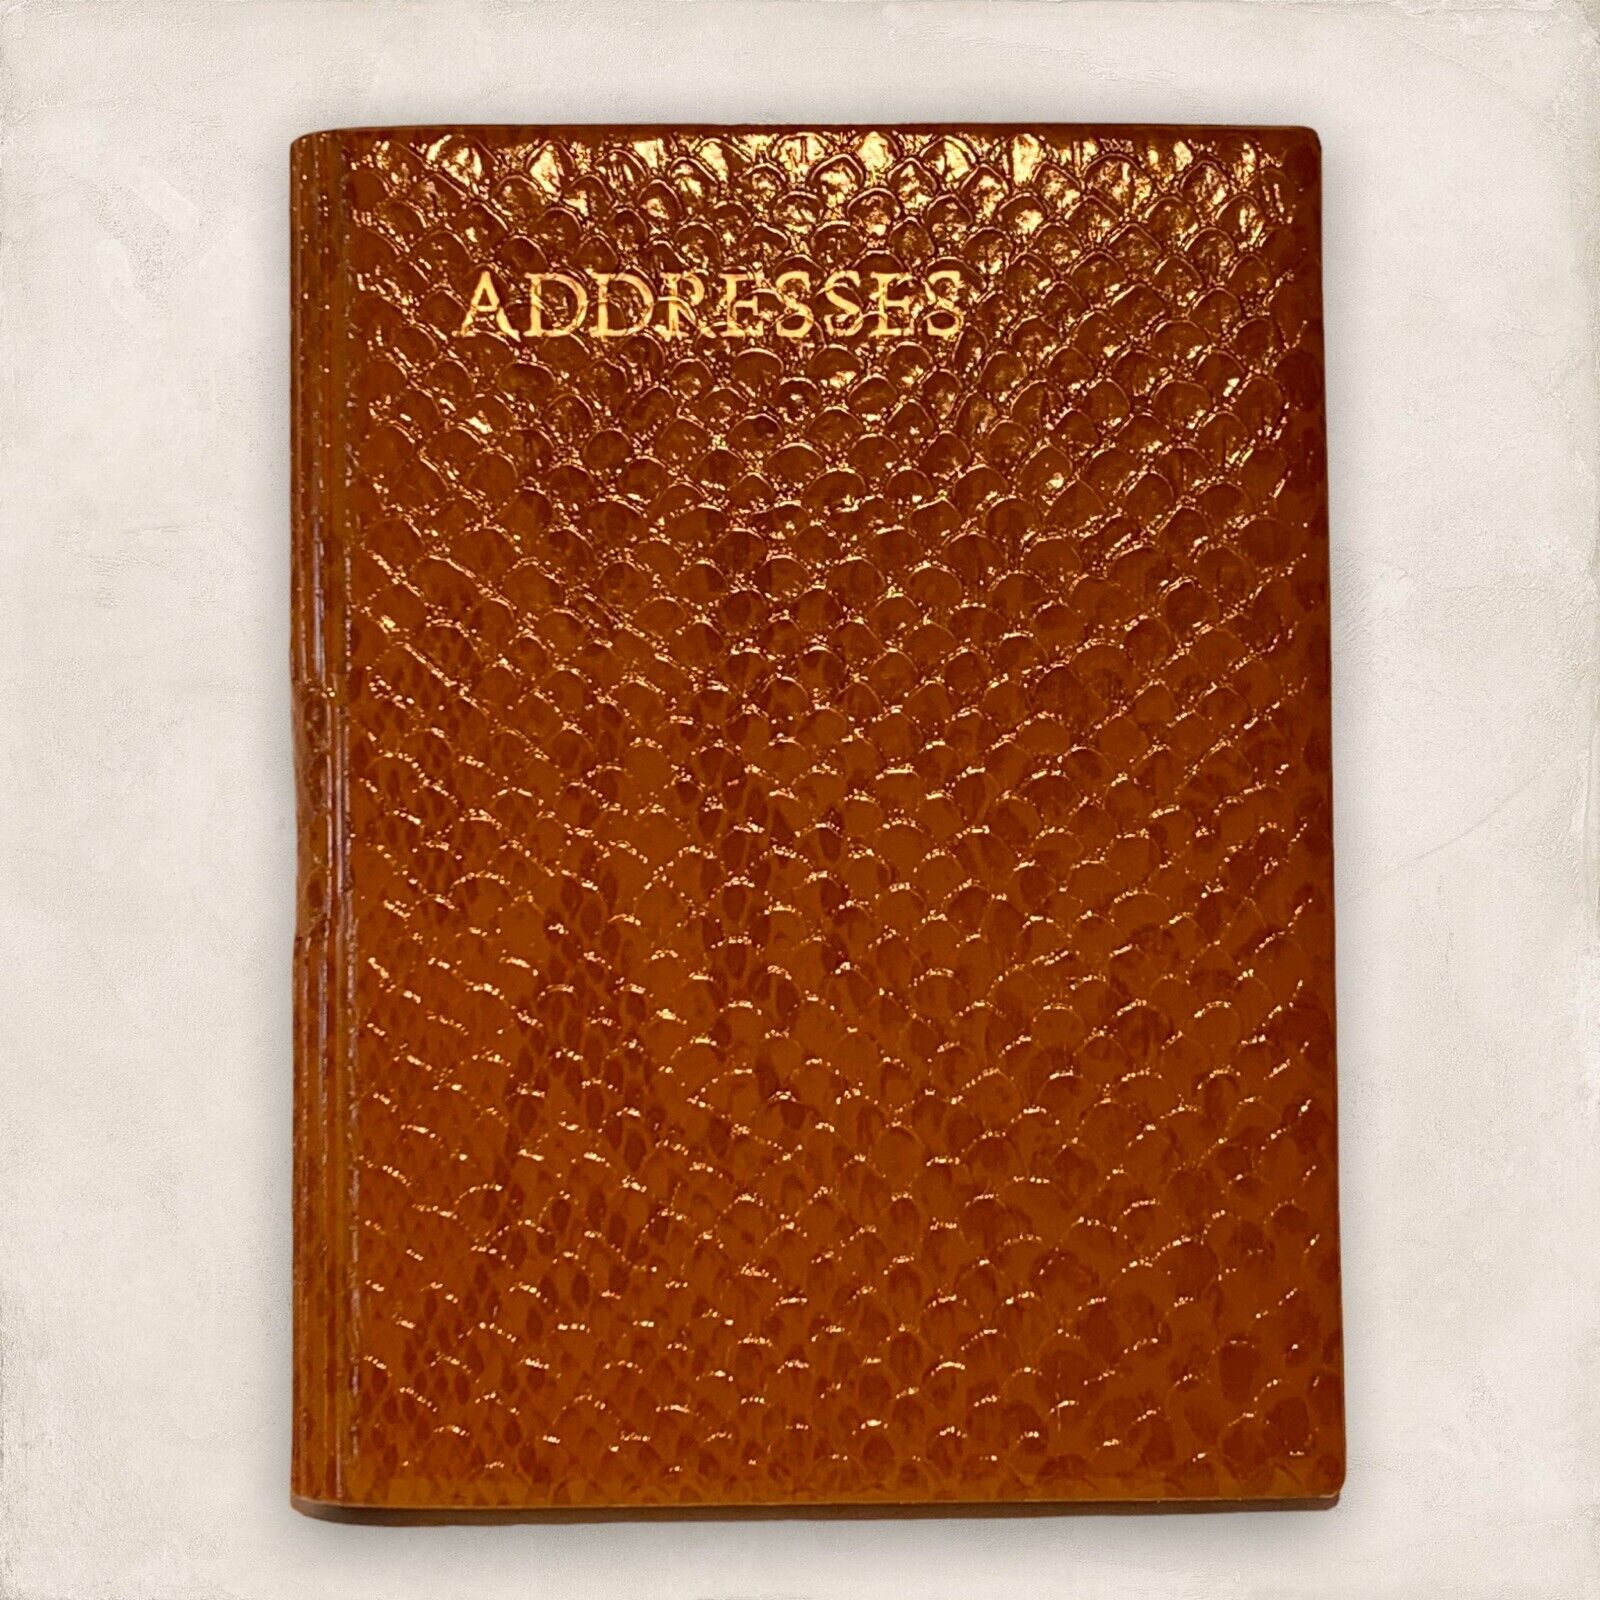 Vintage Address Book Design House Teaneck New Jersey With Pen